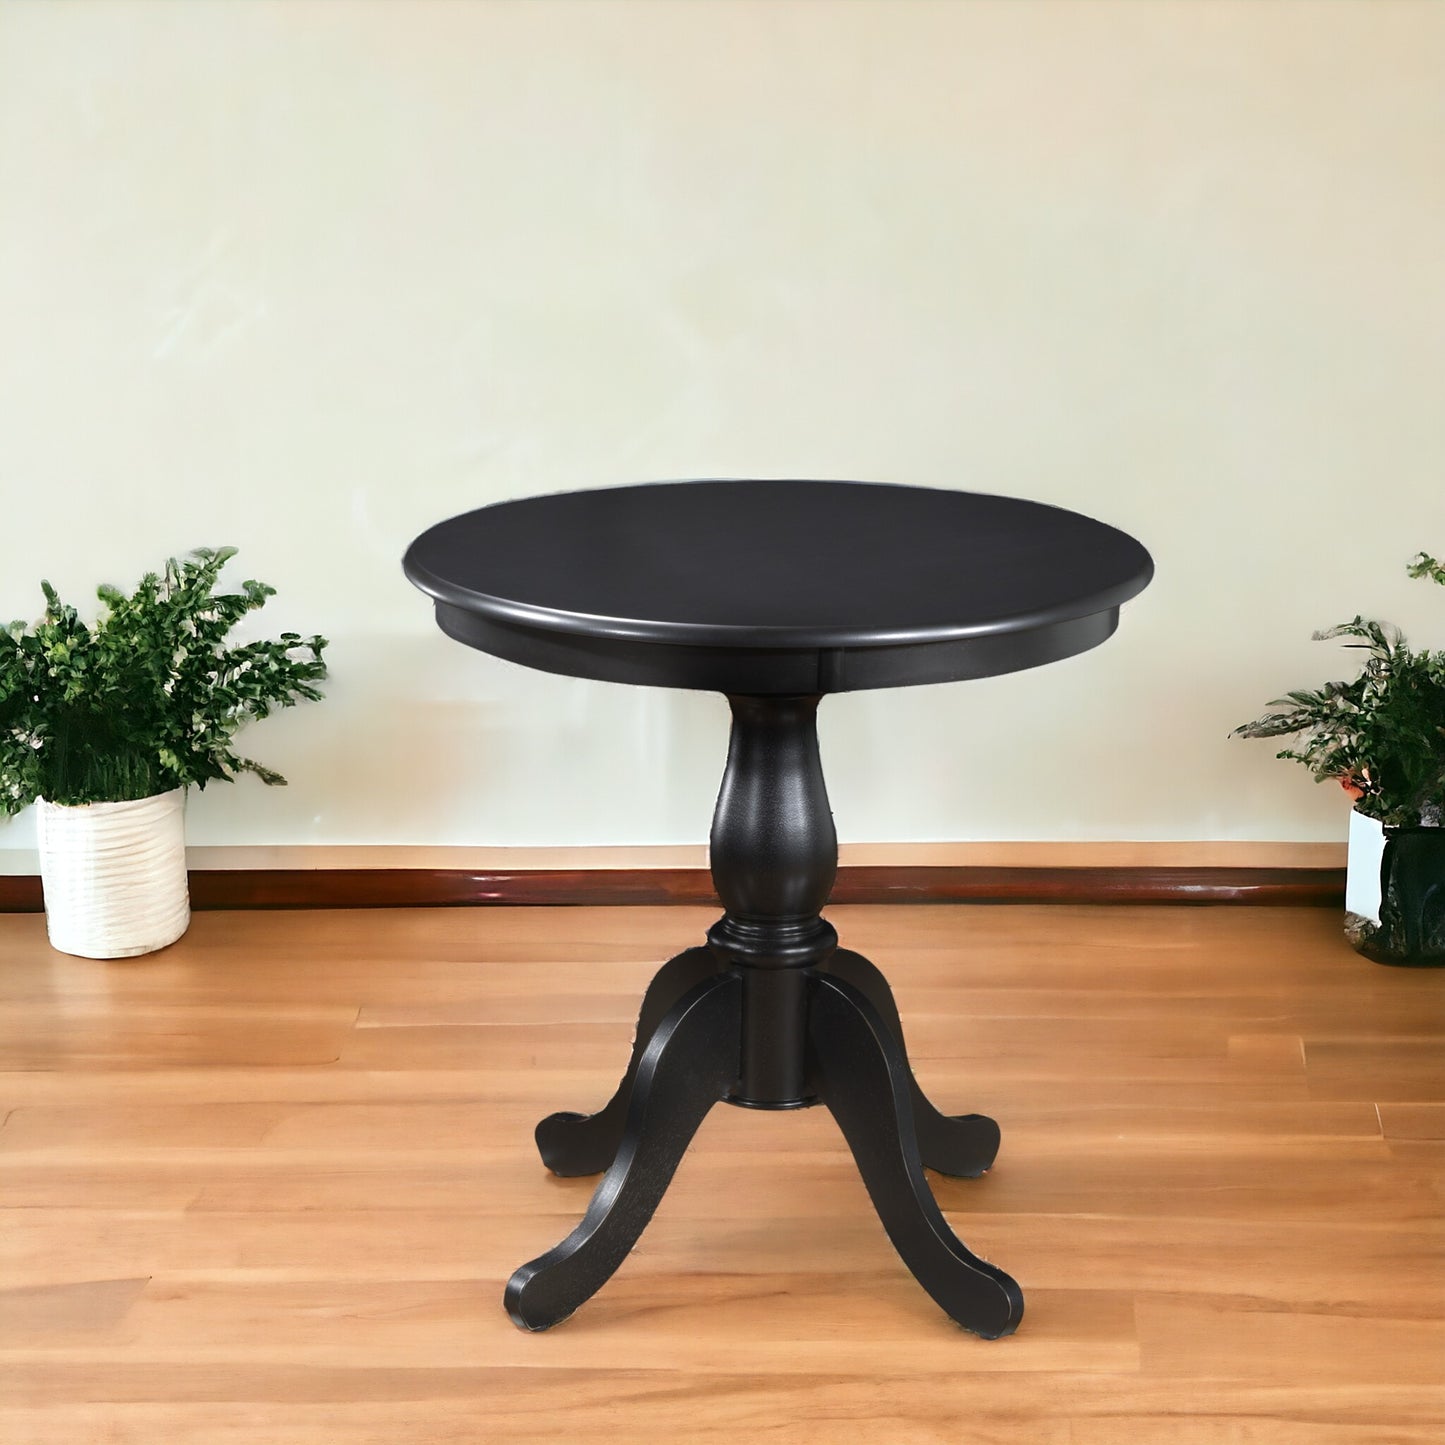 36" Black Rounded Solid Manufactured Wood And Solid Wood Pedestal Base Dining Table